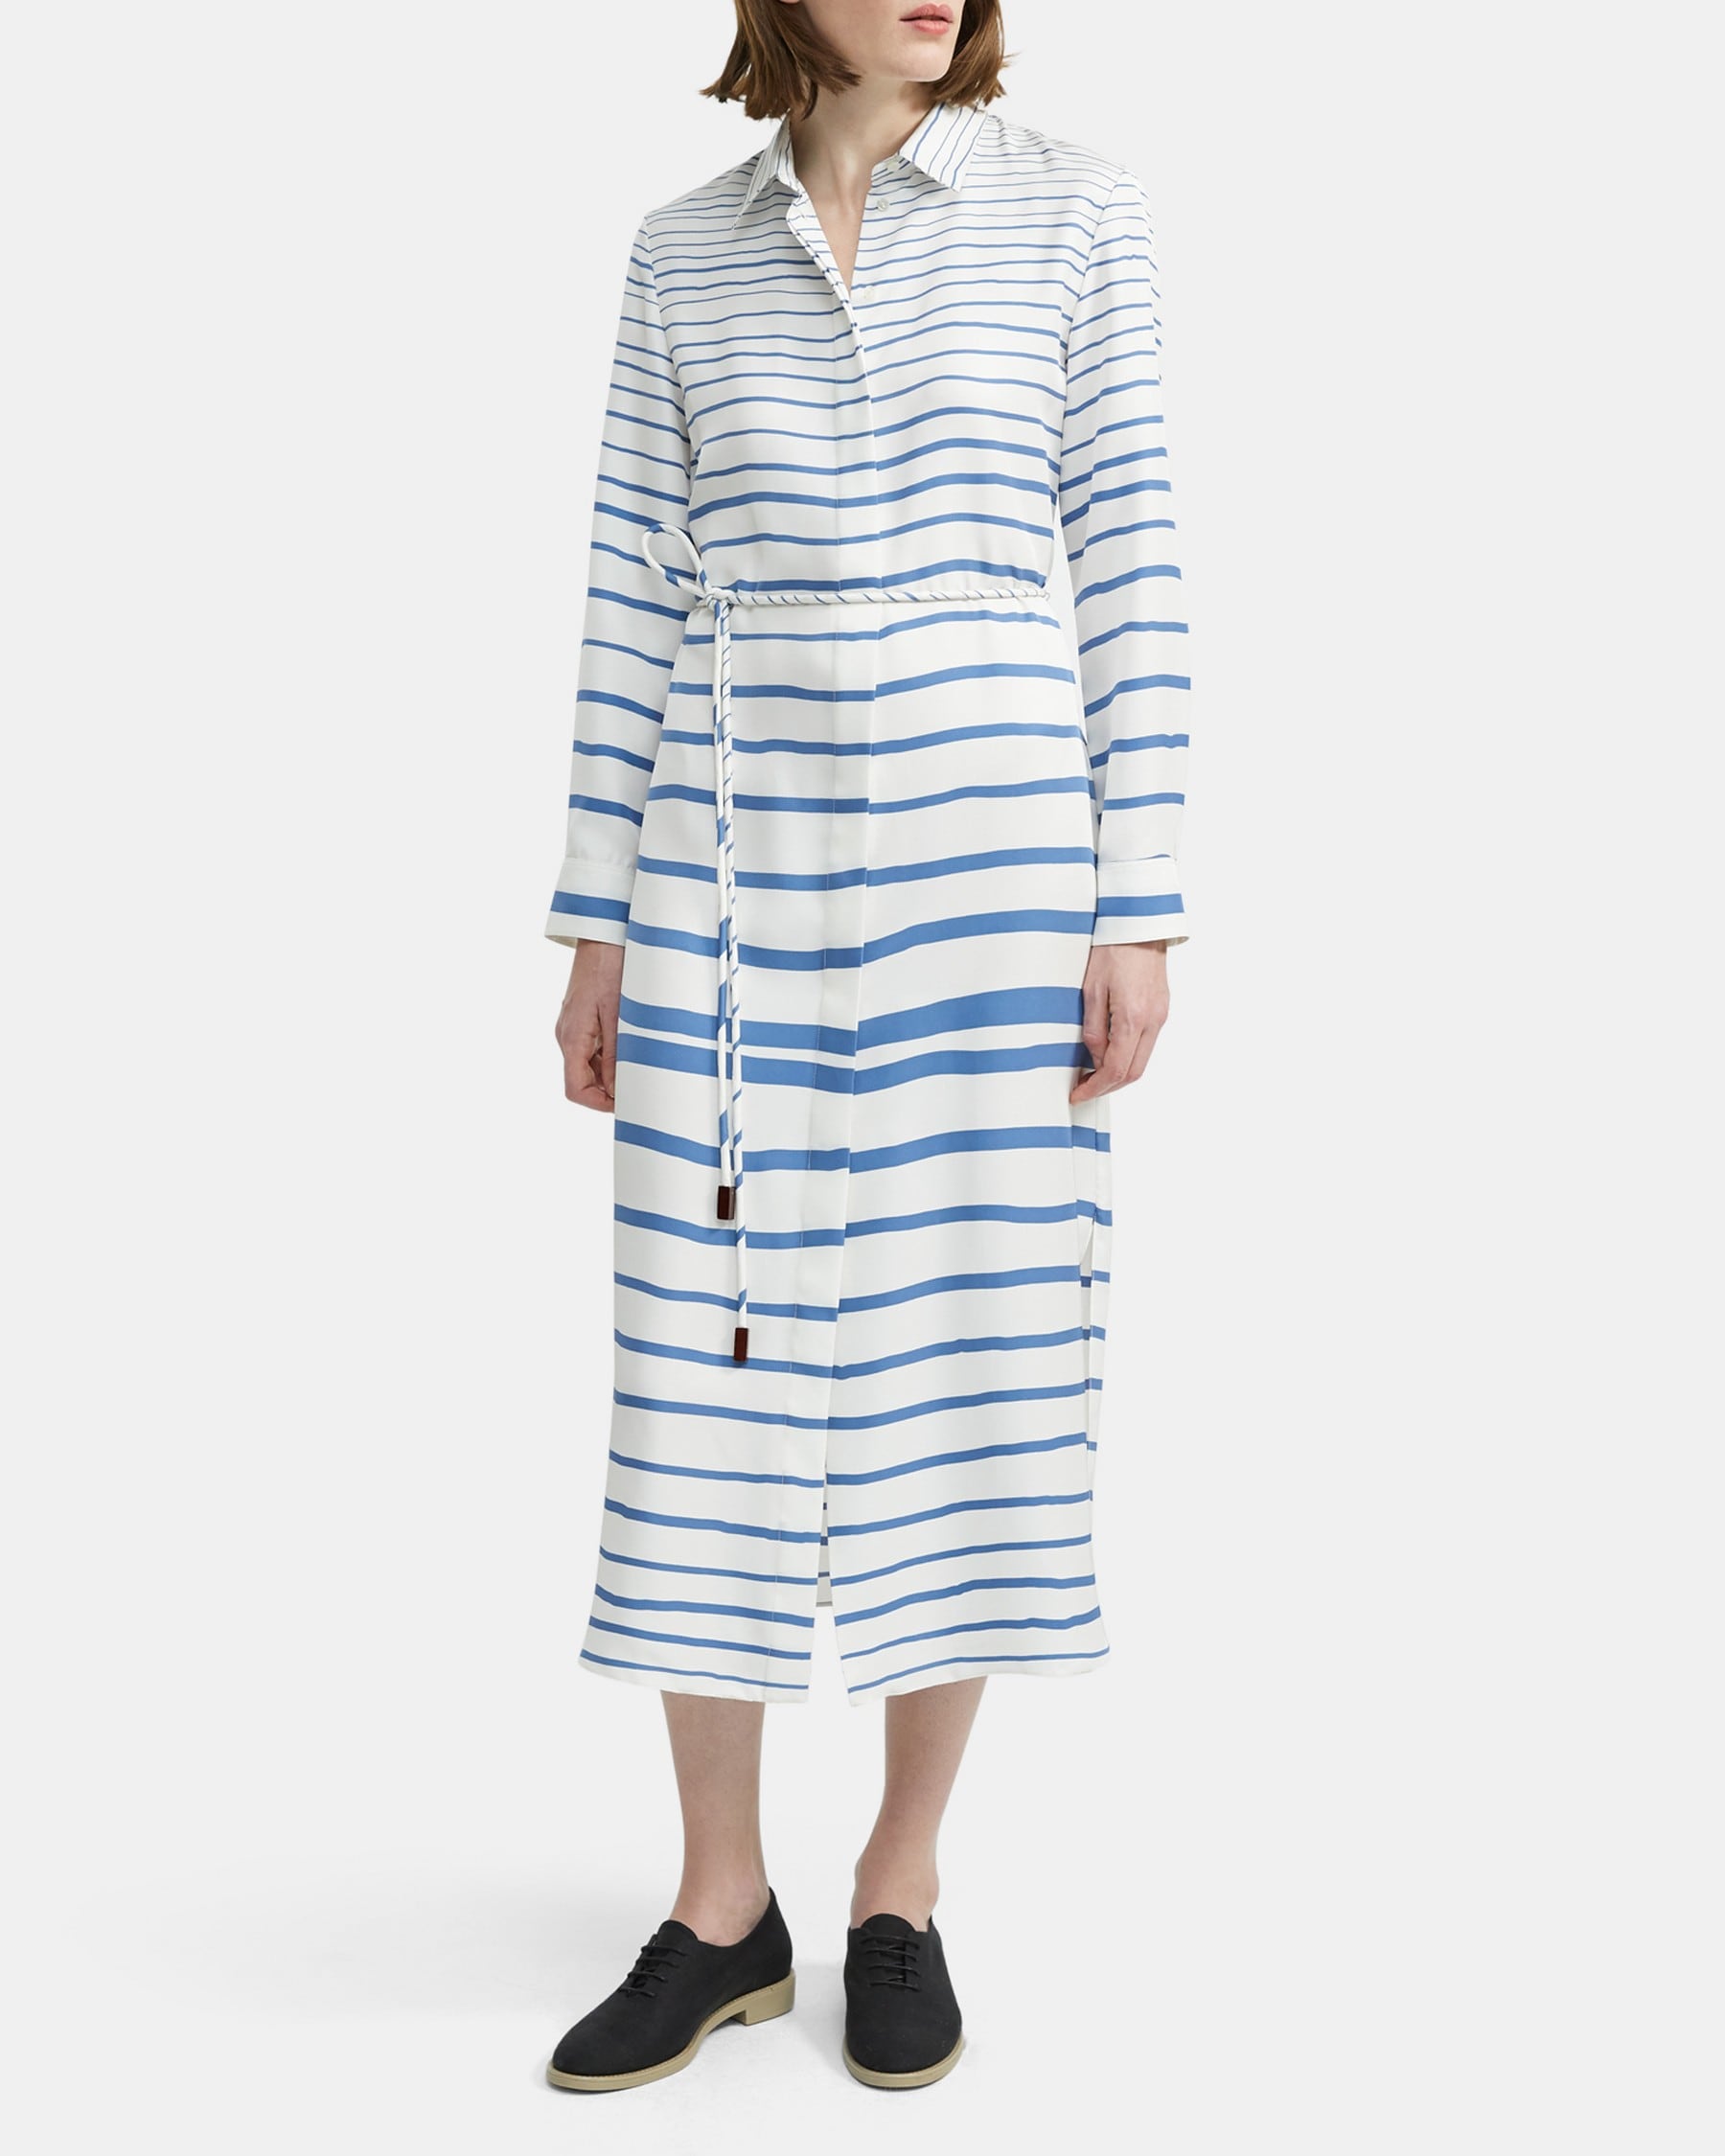 Theory Belted Shirtdress in Striped Silk